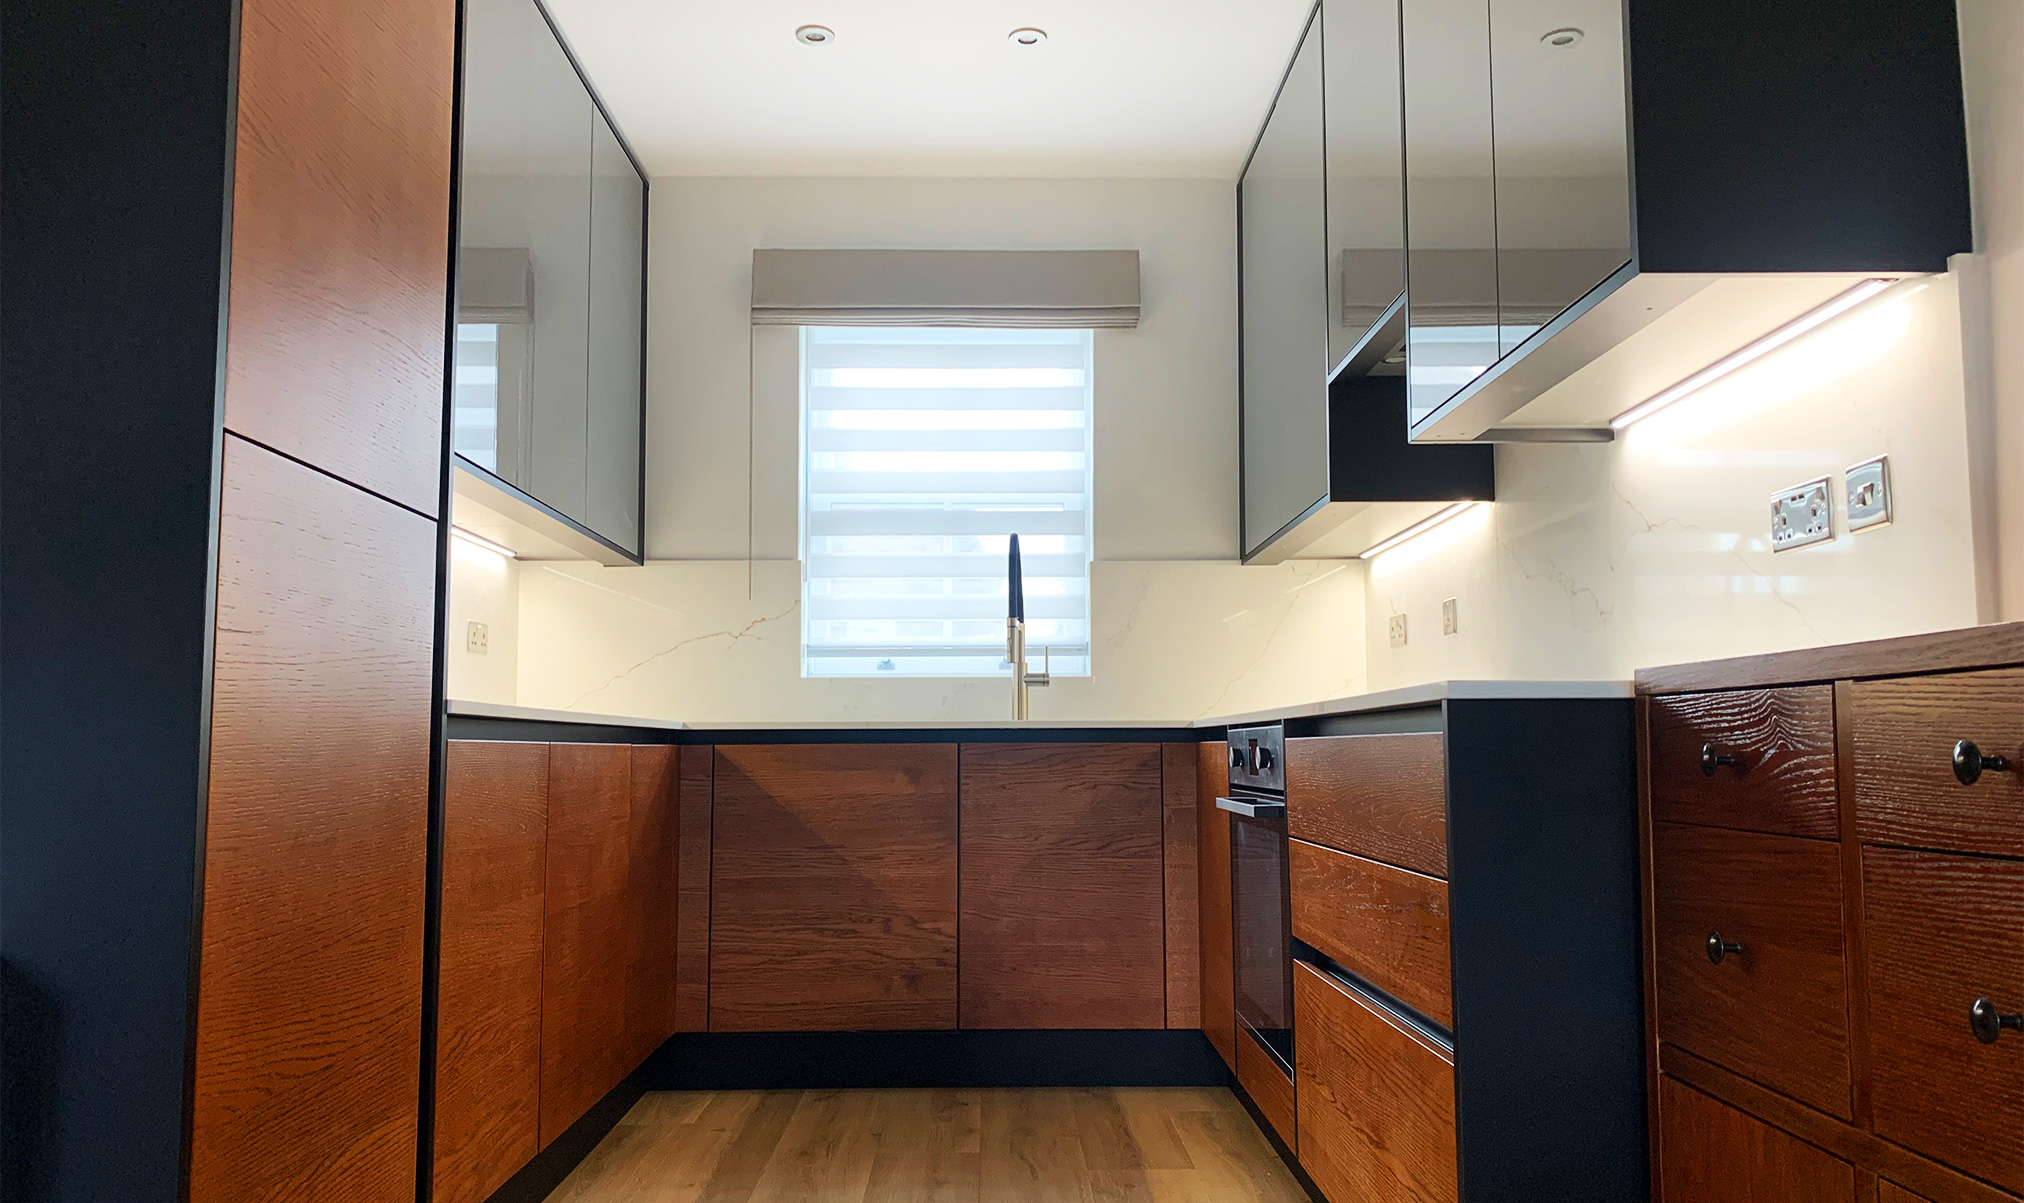 A sophisticated dark wood kitchen with sleek matt black accents, marrying elegance with modern design. Explore the perfect blend of timeless warmth and contemporary style.